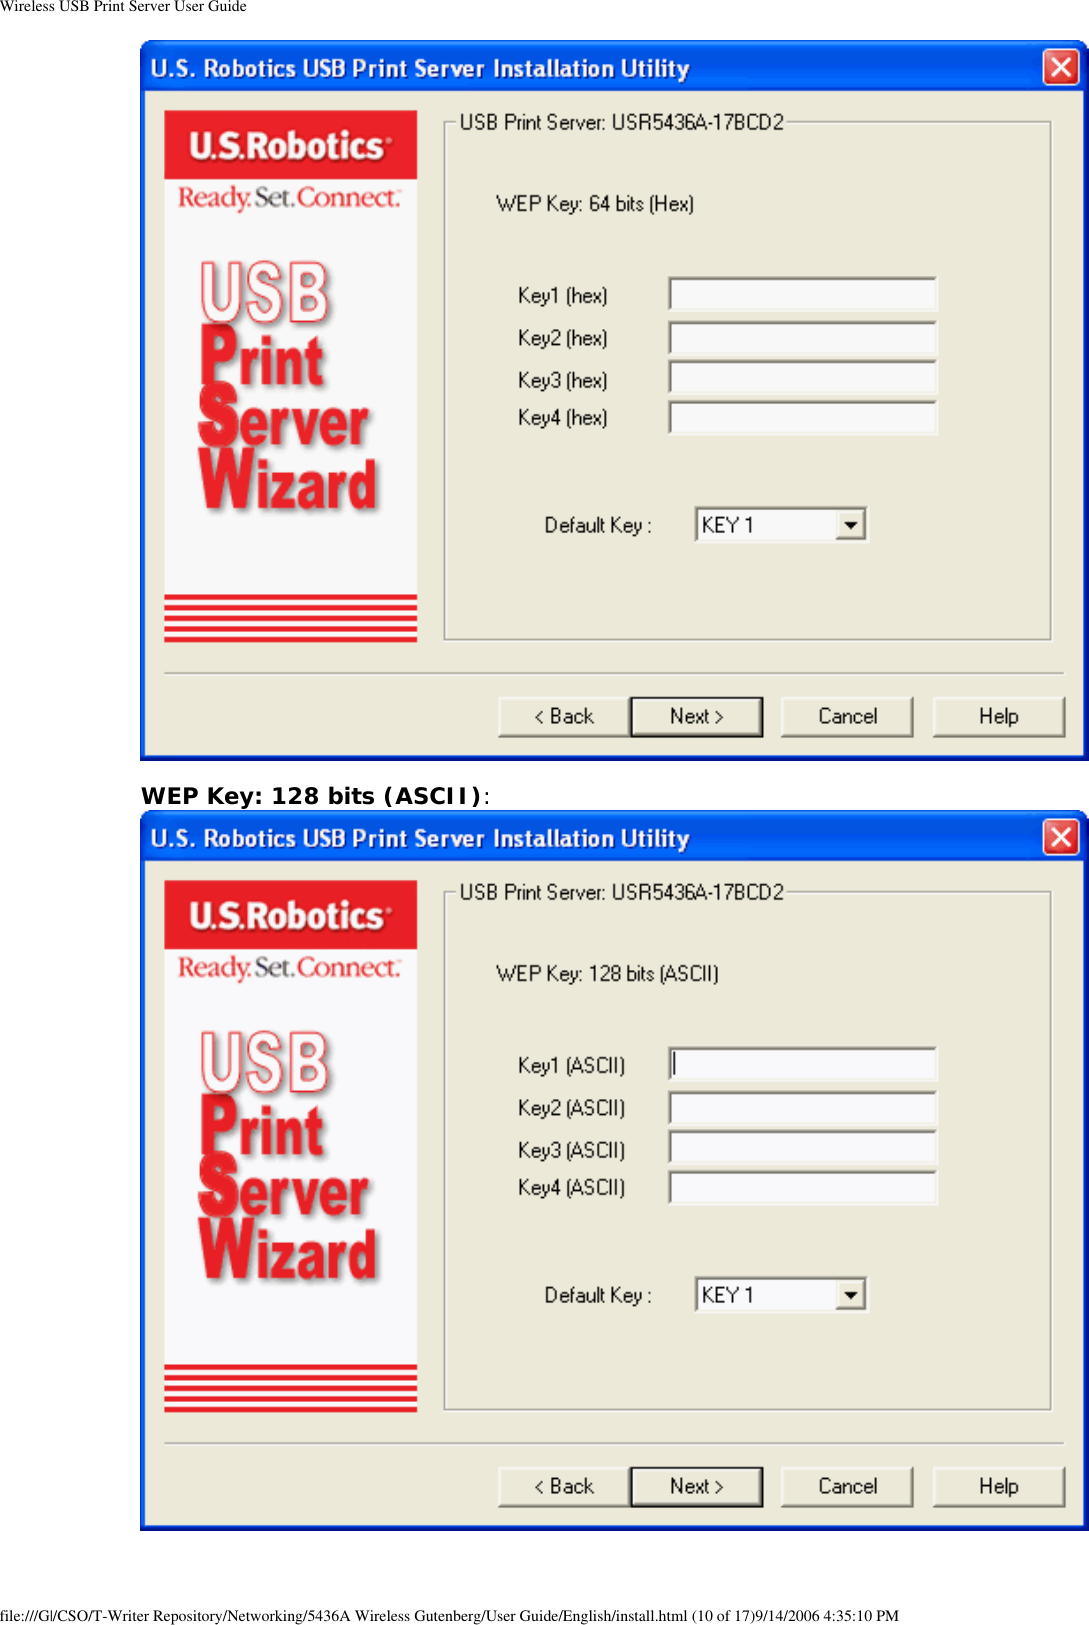 Wireless USB Print Server User Guide  WEP Key: 128 bits (ASCII):    file:///G|/CSO/T-Writer Repository/Networking/5436A Wireless Gutenberg/User Guide/English/install.html (10 of 17)9/14/2006 4:35:10 PM